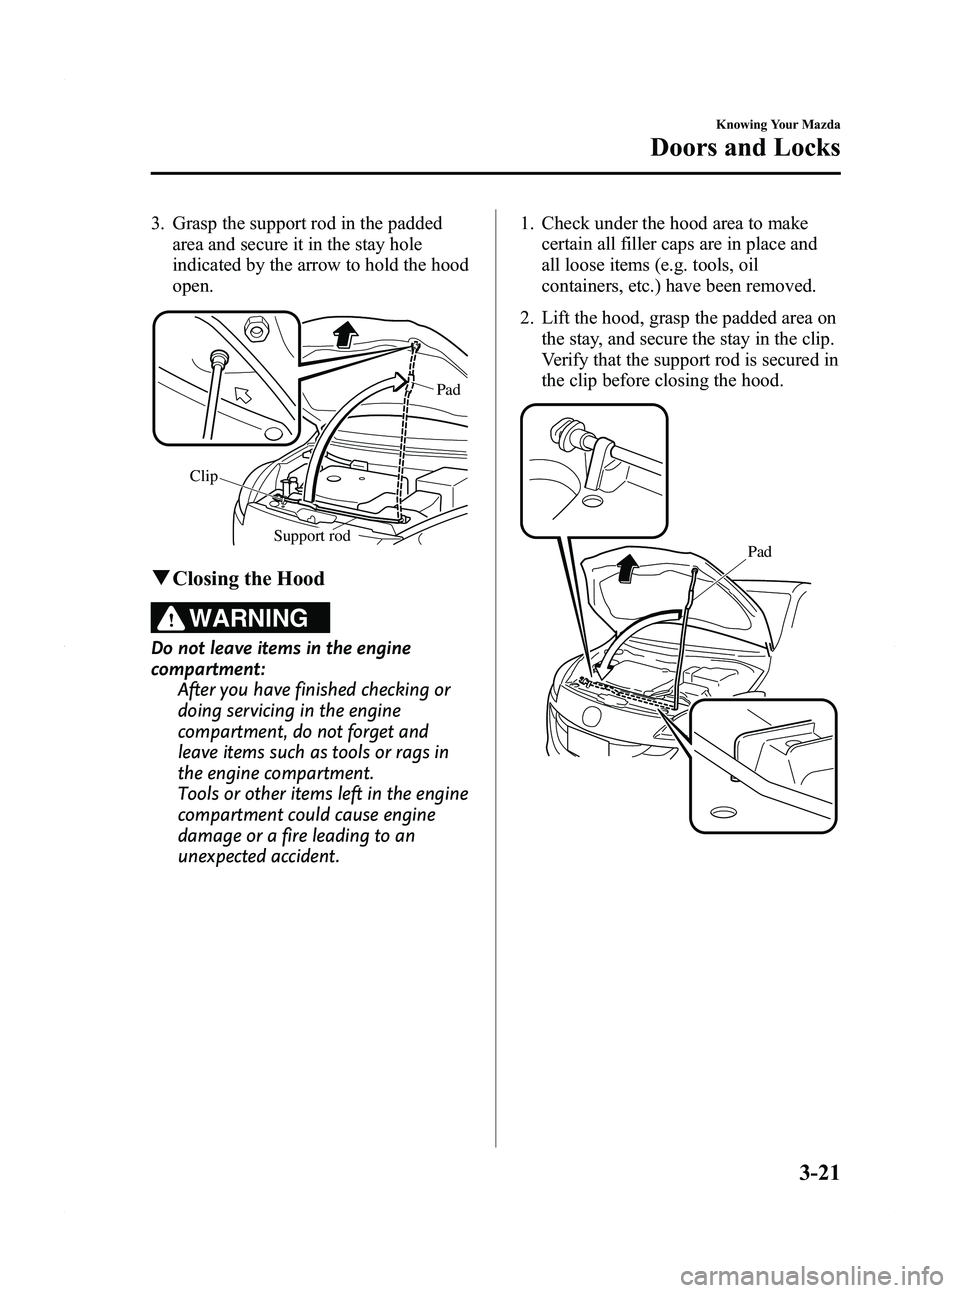 MAZDA MODEL 5 2012  Owners Manual Black plate (99,1)
3. Grasp the support rod in the paddedarea and secure it in the stay hole
indicated by the arrow to hold the hood
open.
Support rod 
Clip
Pad
q
Closing the Hood
WARNING
Do not leave